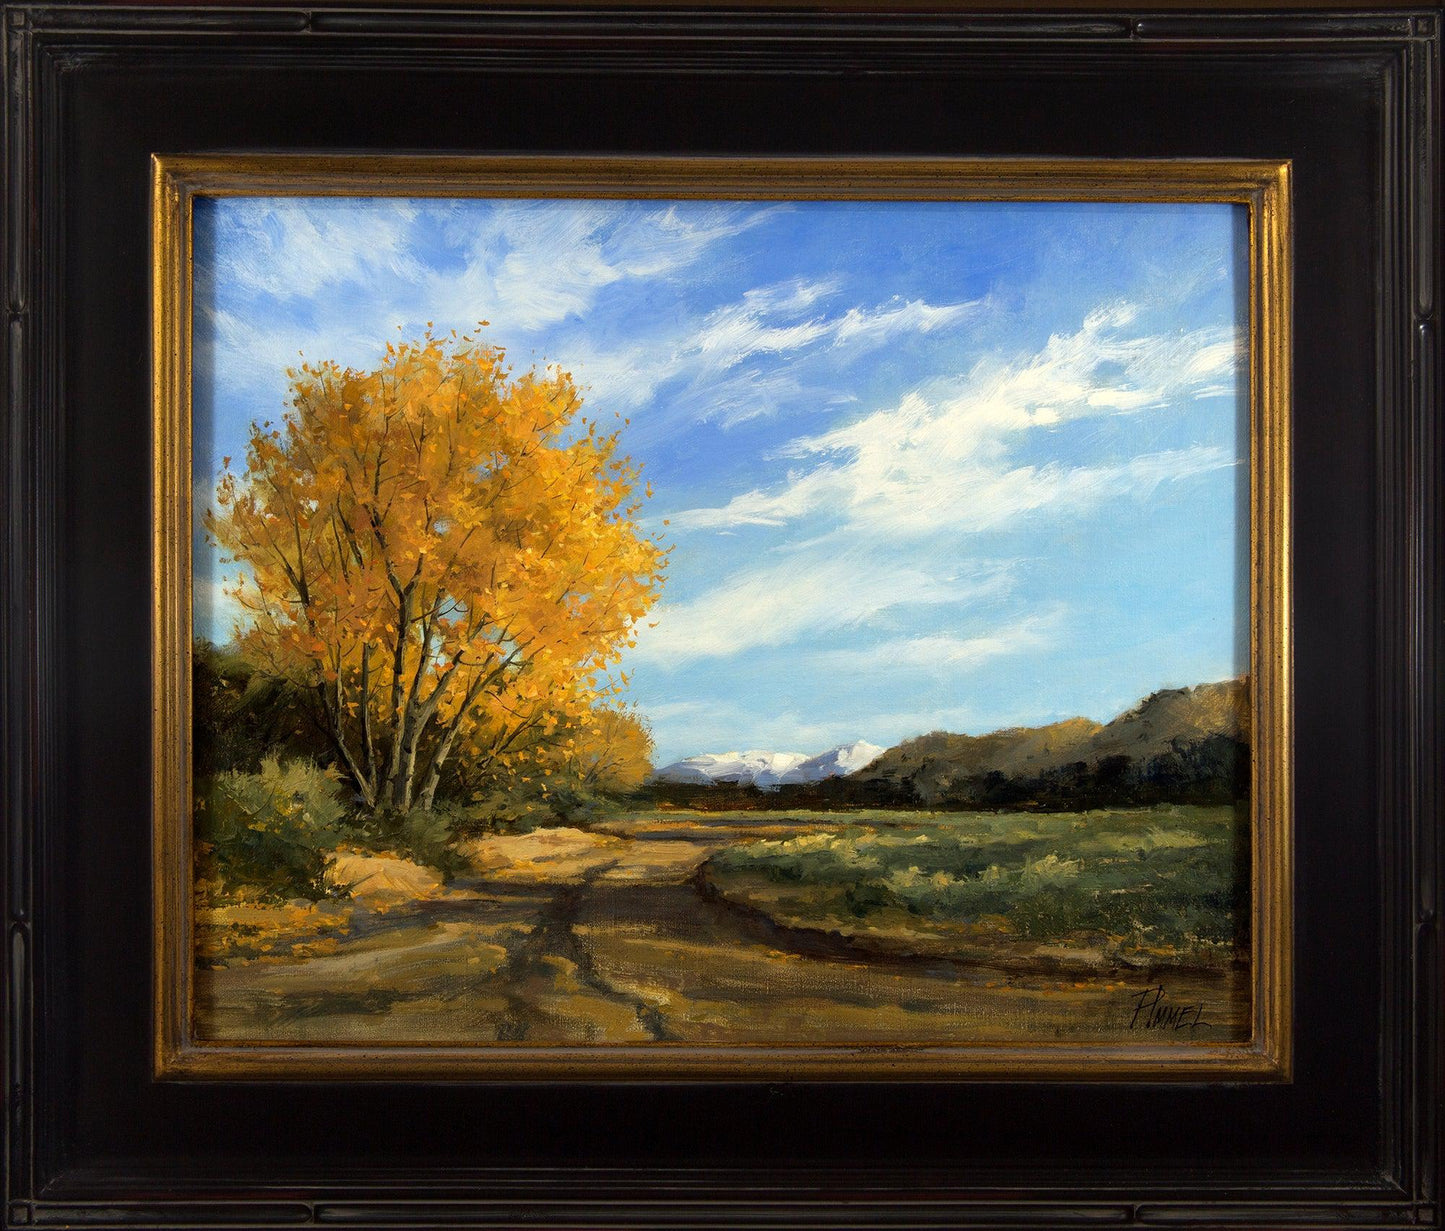 Up a Dry Creek Bed-Painting-Peggy Immel-Sorrel Sky Gallery